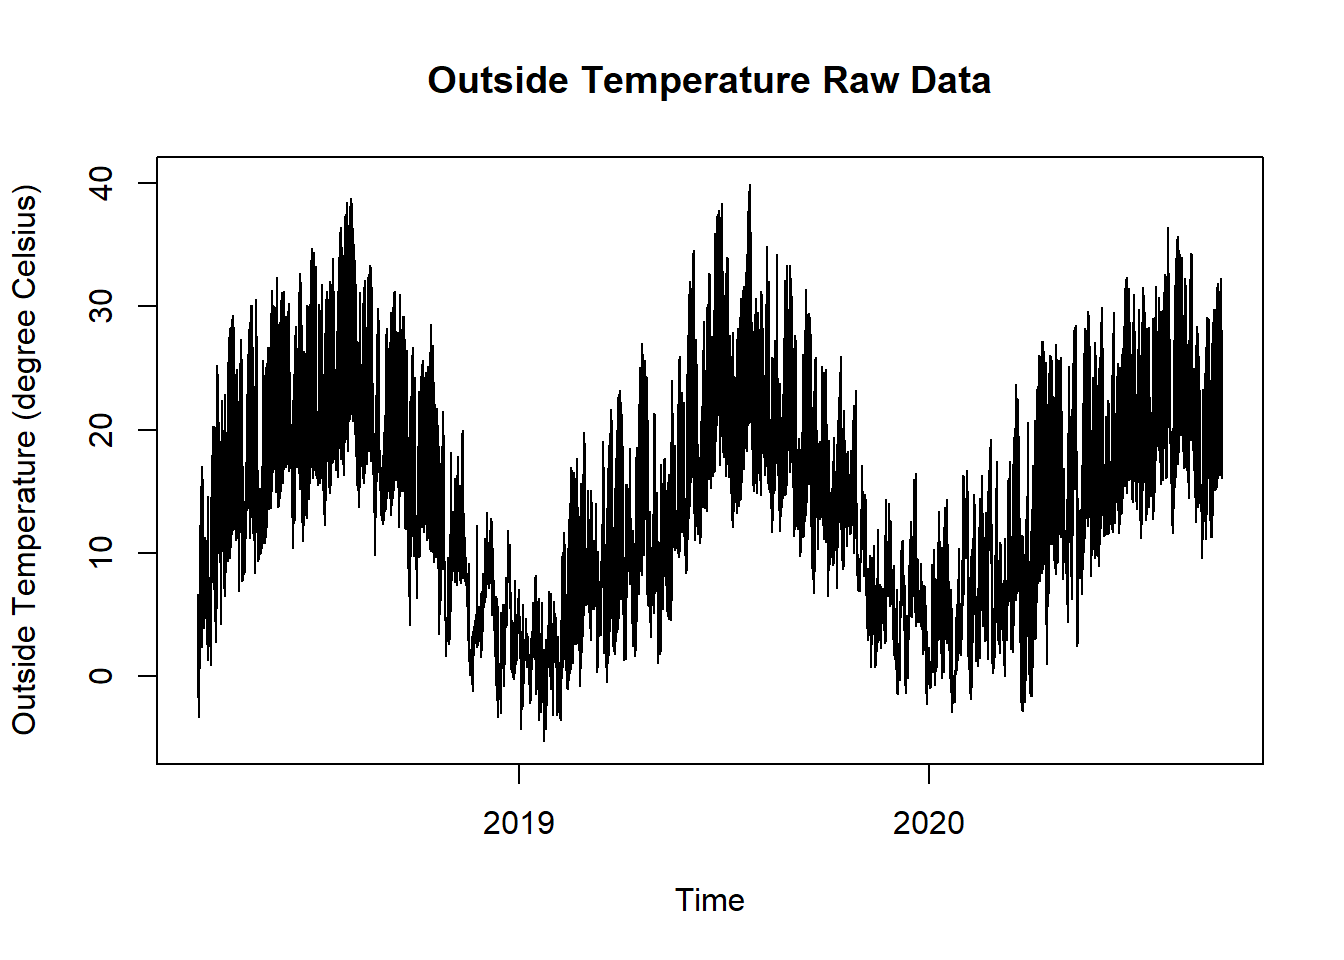 Outside Temperature Raw Data for Sum Frequency Days Plot